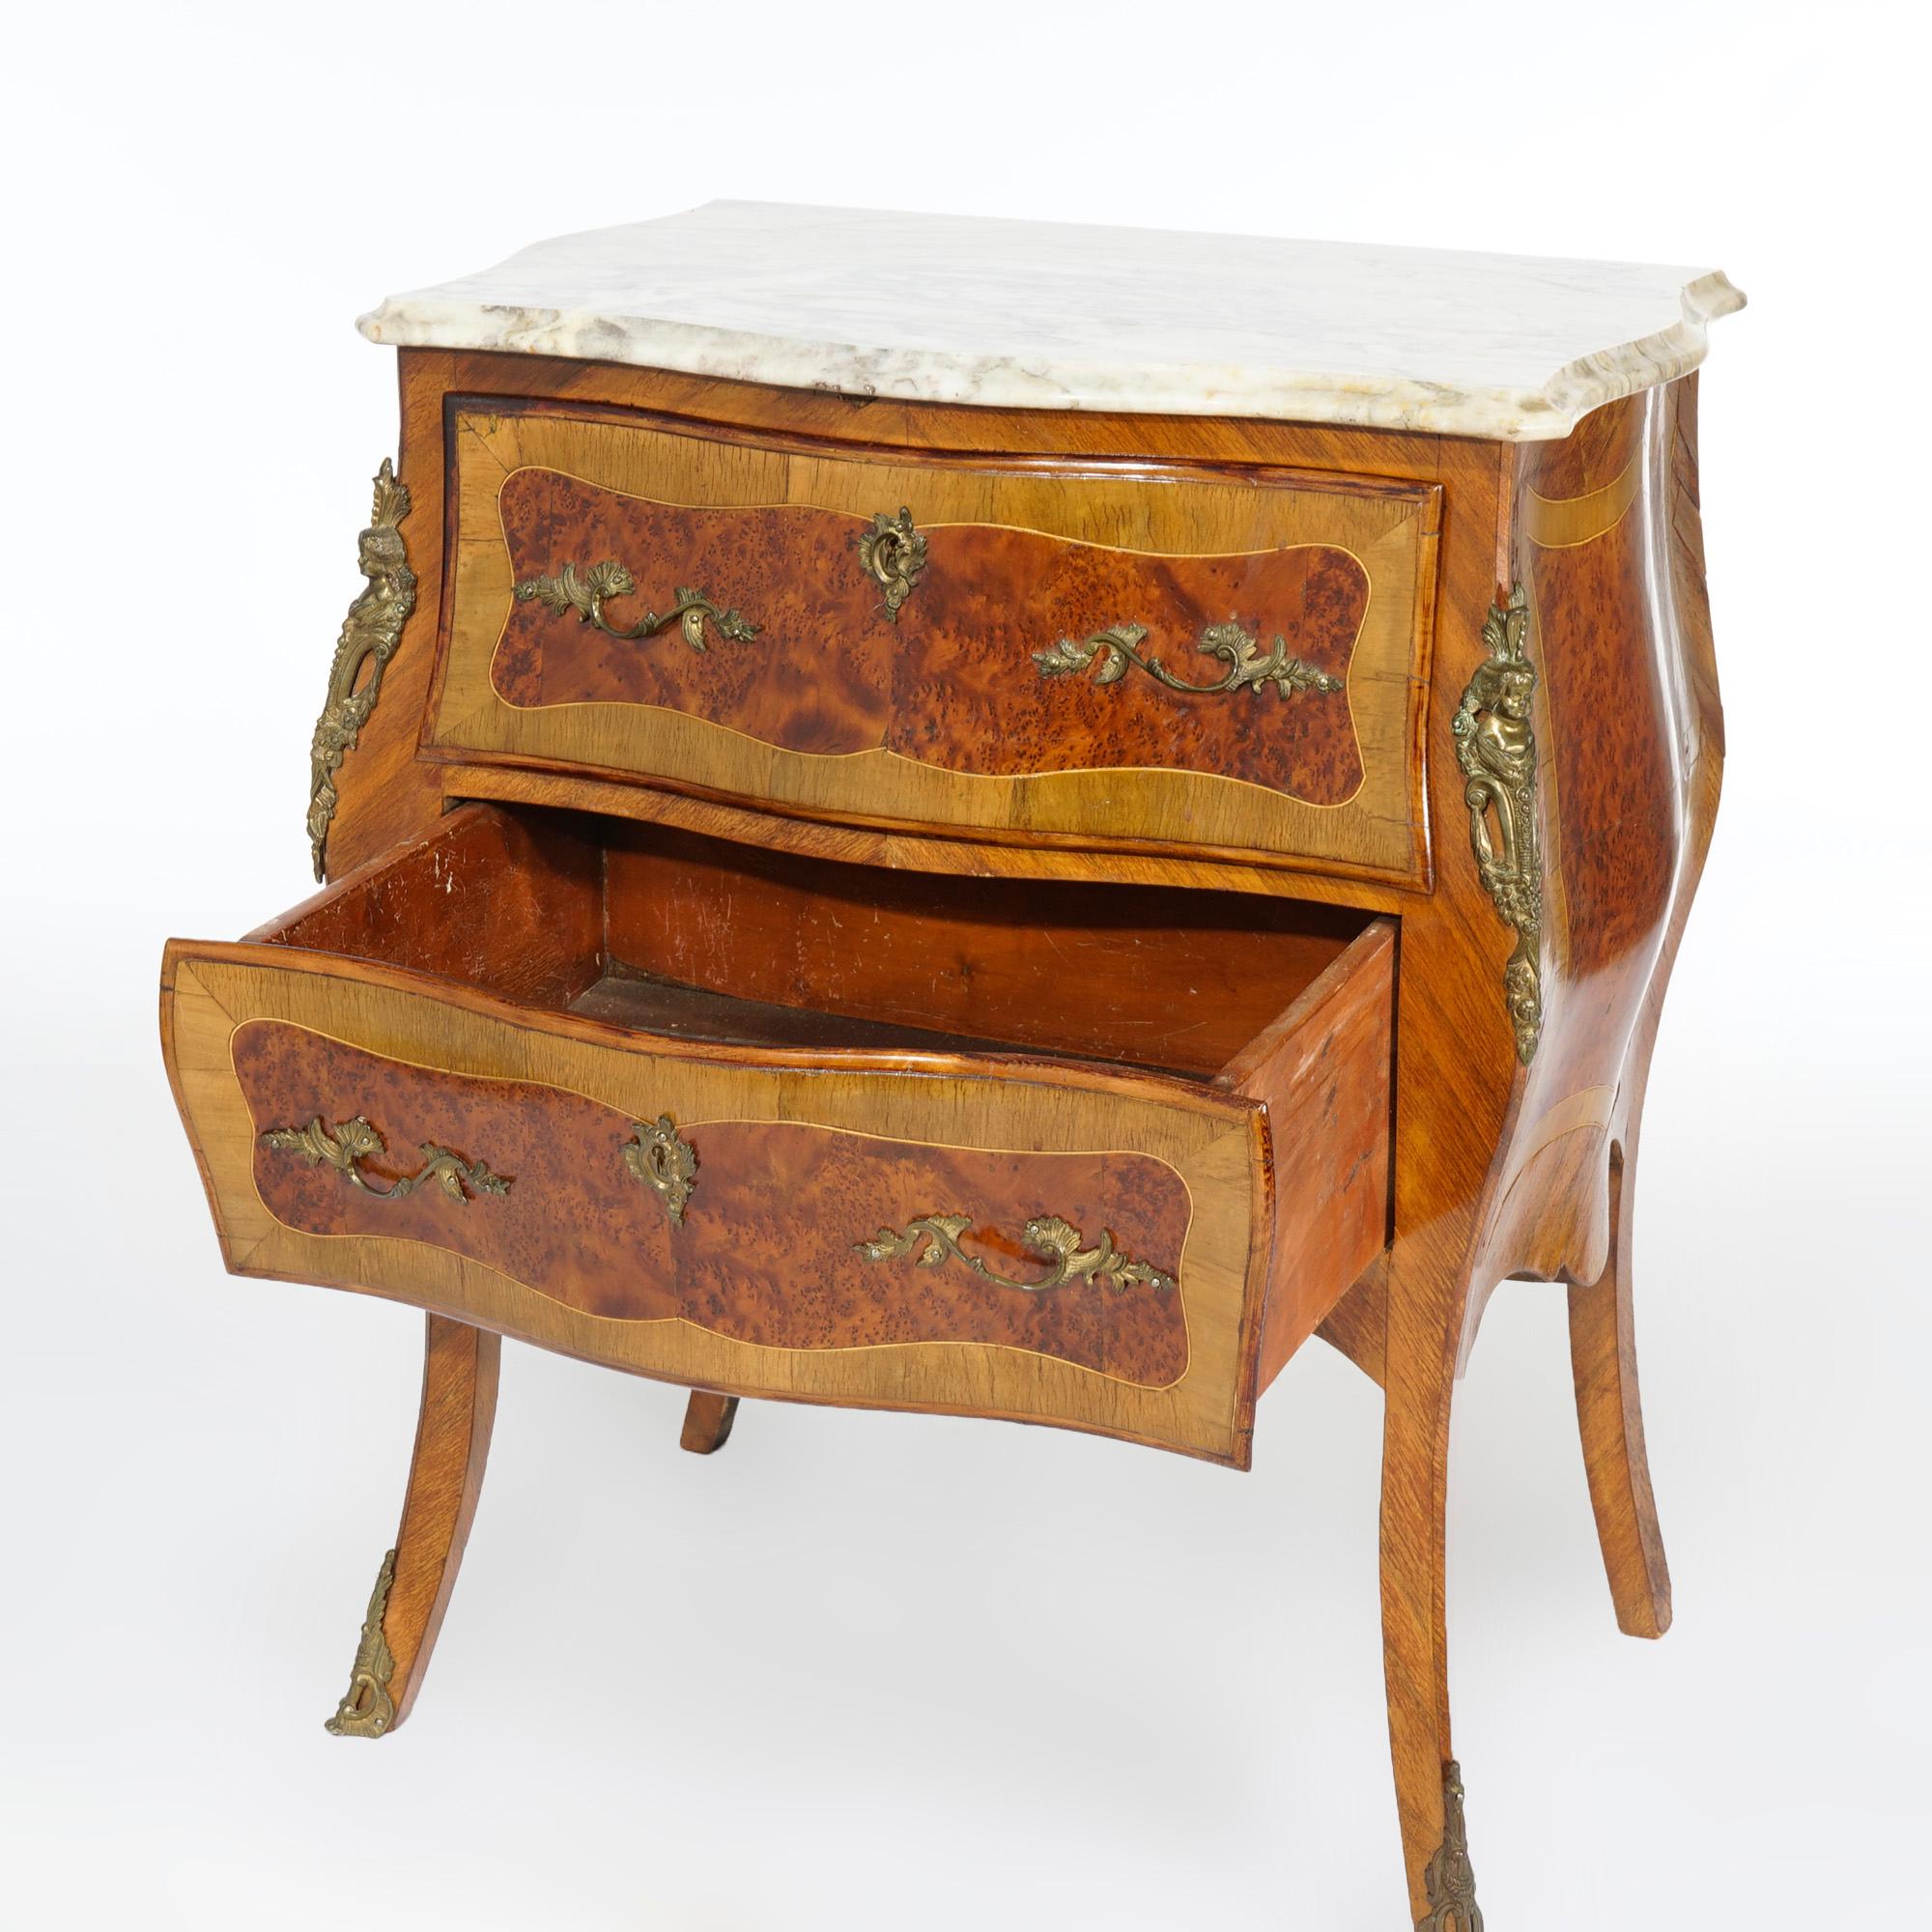 An antique French bombe commode offers shaped and beveled marble top over kingwood and rosewood case having swell front, two drawers, inlaid decoration and cast ormolu throughout, raised on cabriole legs, c1910

Measures- 30.5''H x 25.25''W x